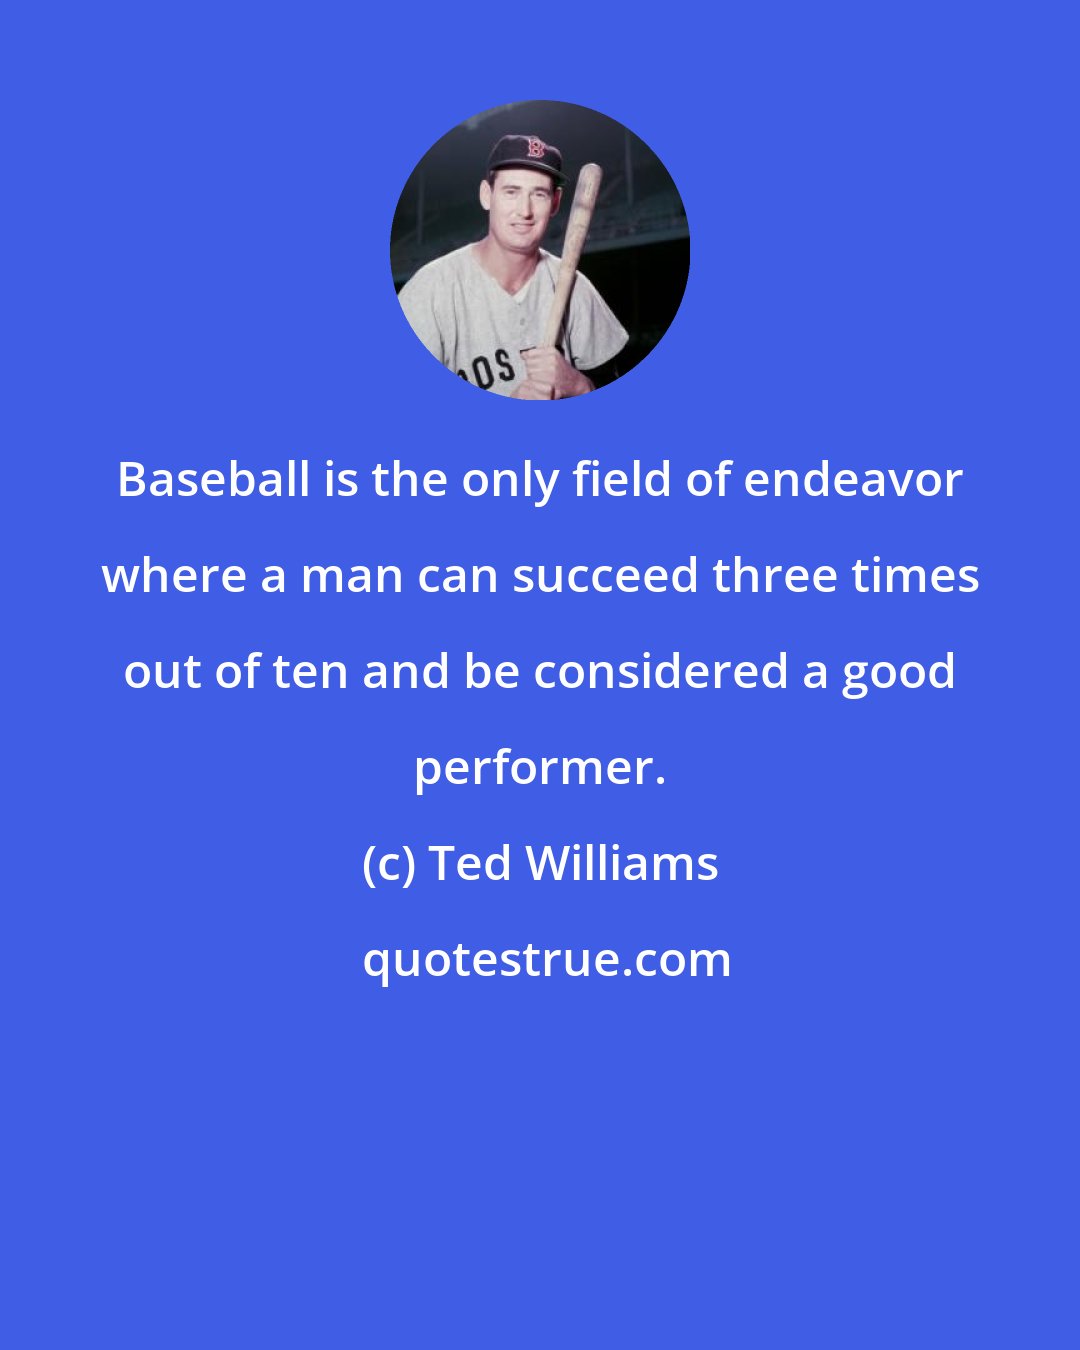 Ted Williams: Baseball is the only field of endeavor where a man can succeed three times out of ten and be considered a good performer.